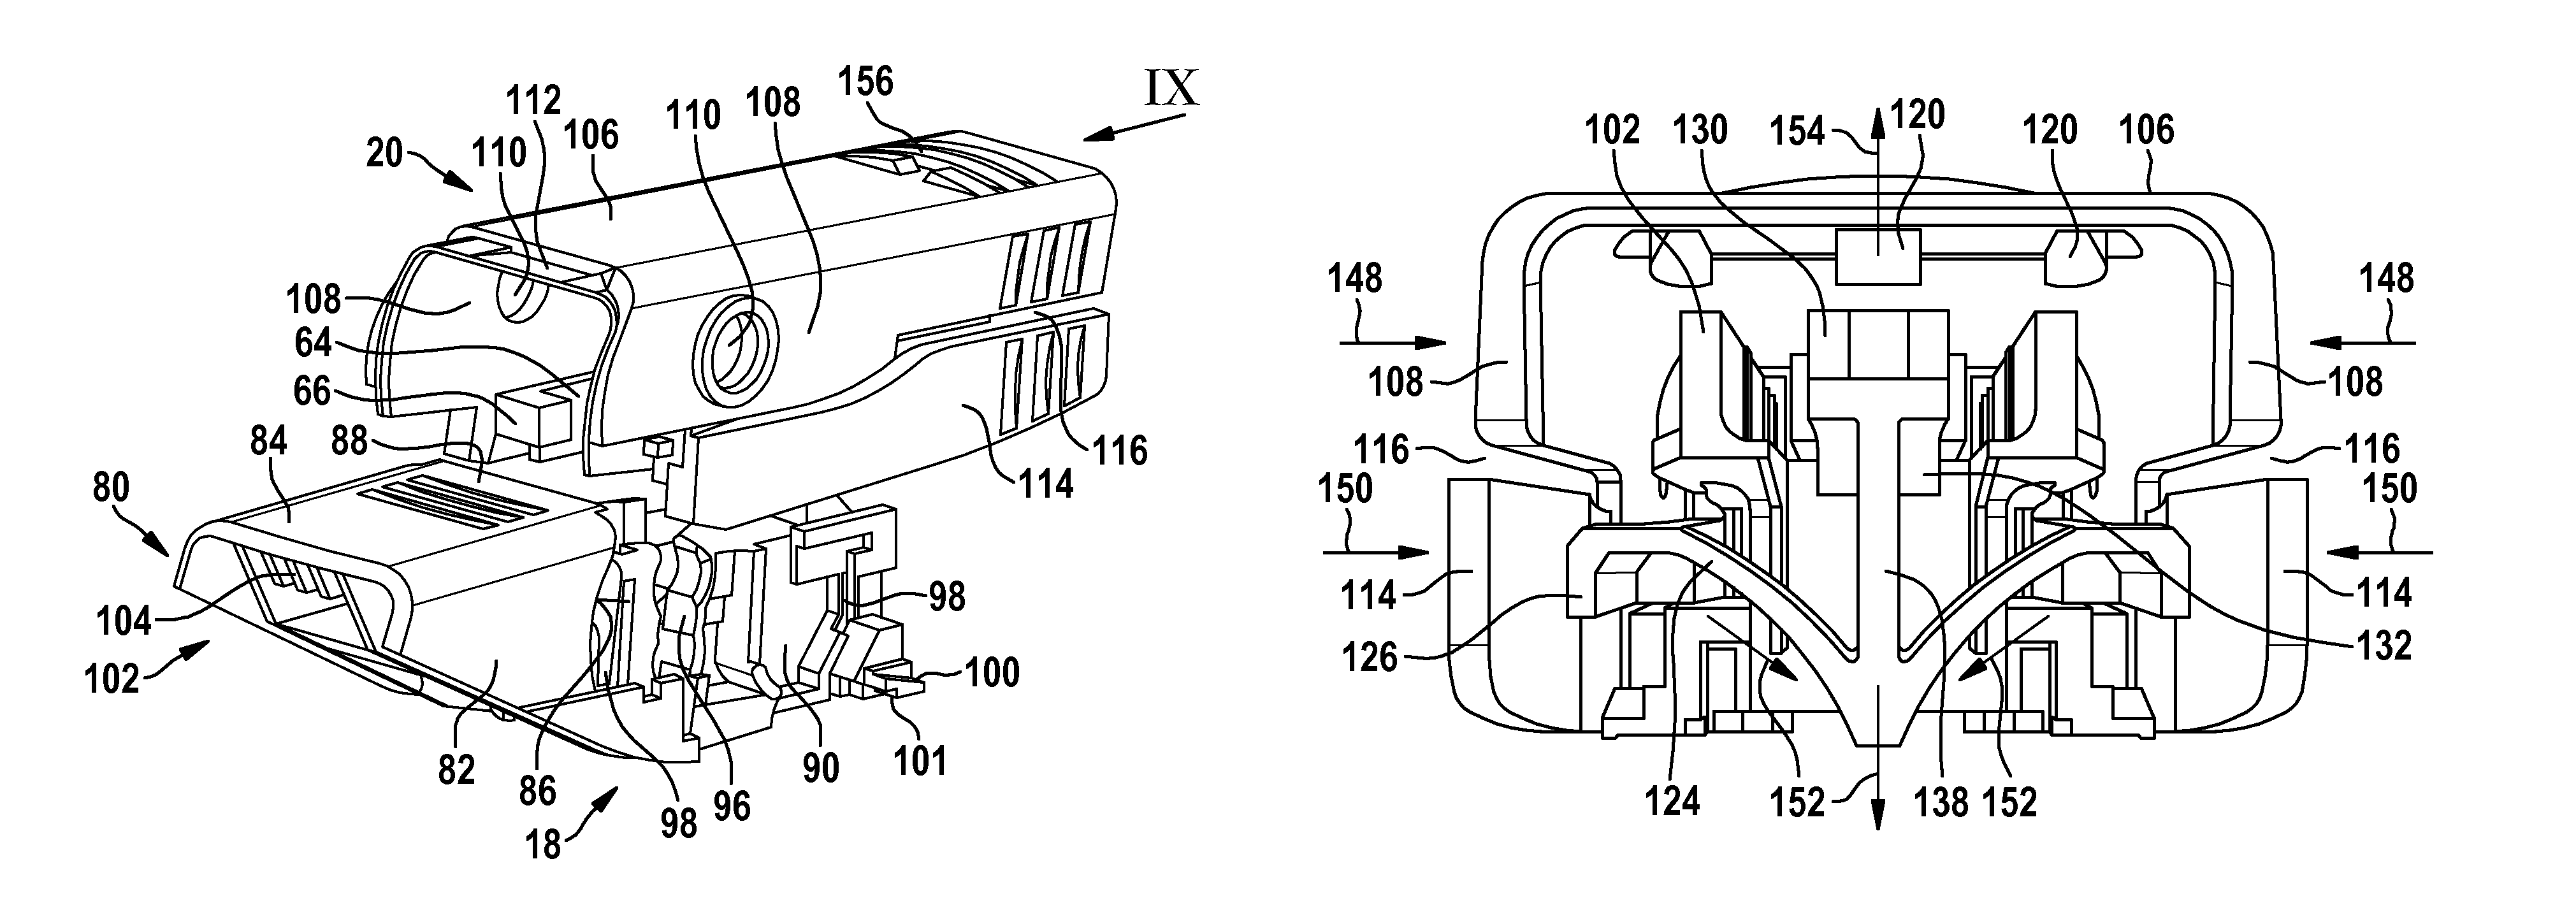 Connecting device for the articulated connection of a wiper blade to a wiper arm, and an adaptor